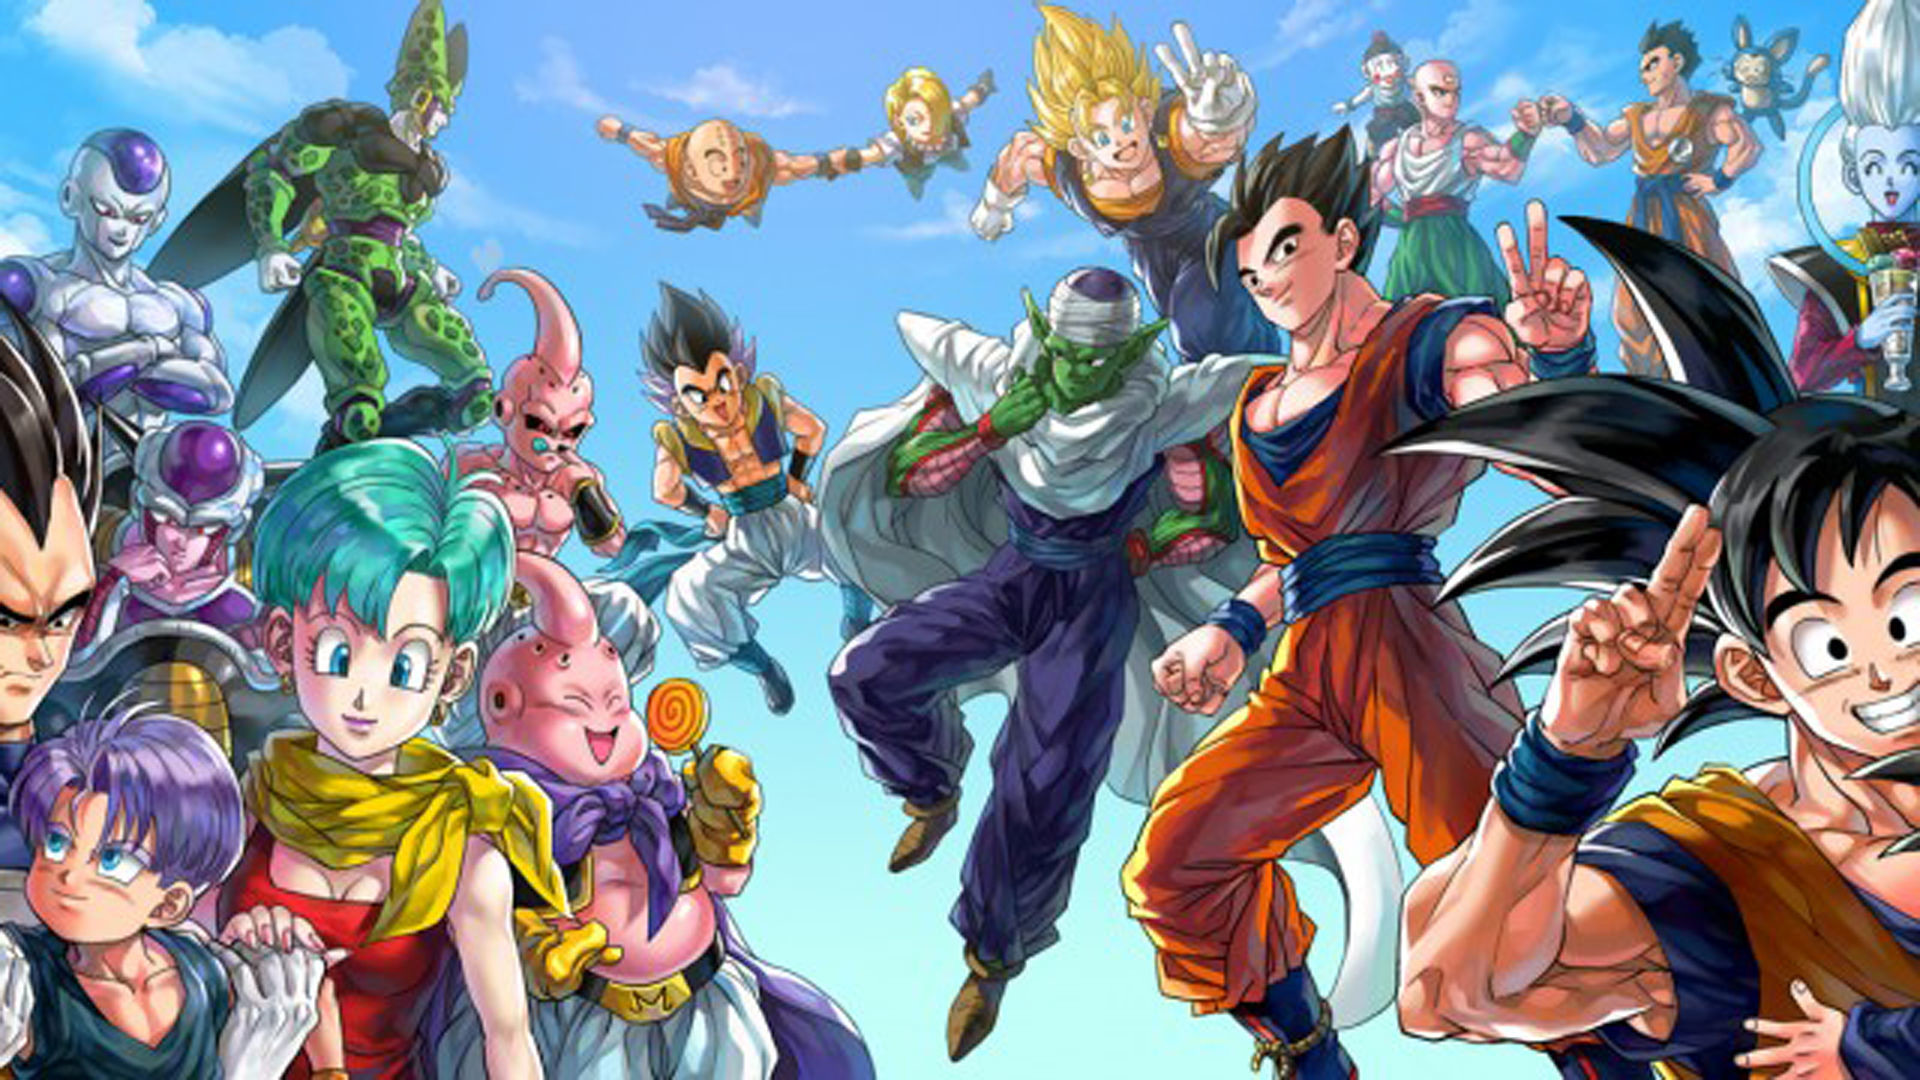 Awesome Dragon Ball Z Backgrounds